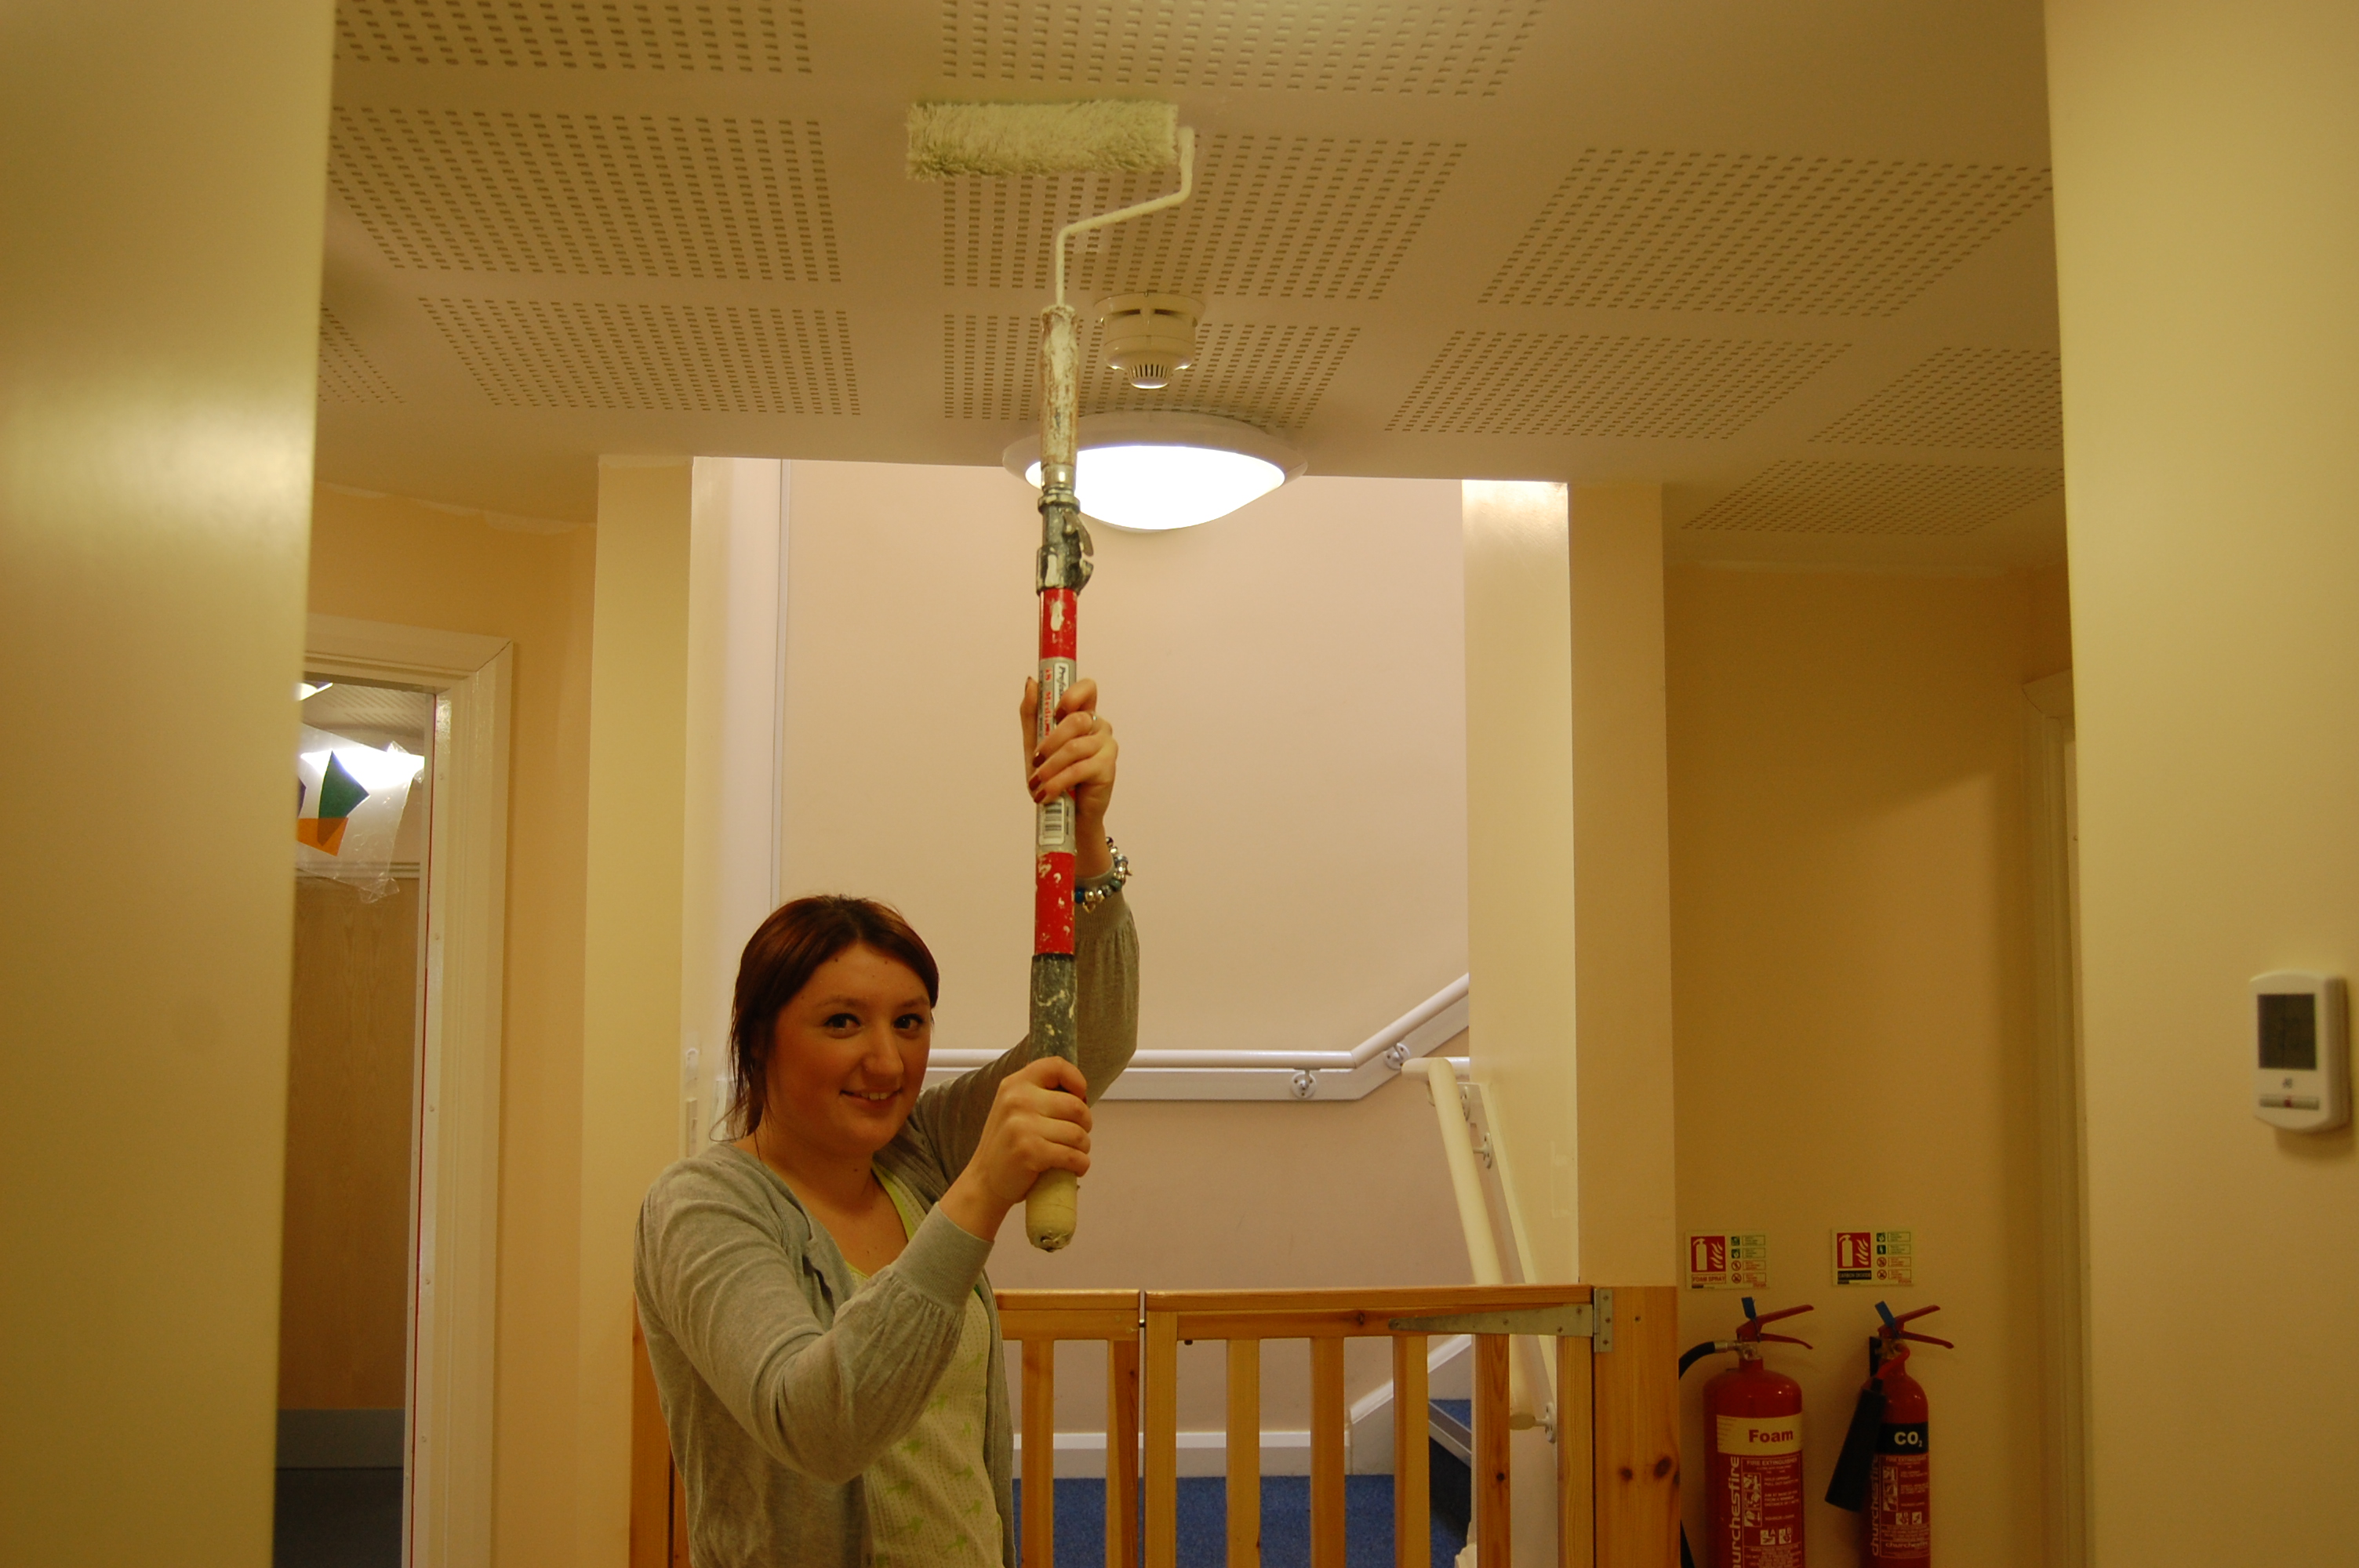 The City of Lincoln Council's apprentices celebrated the week by redecorating rooms at the LIDAS hostel